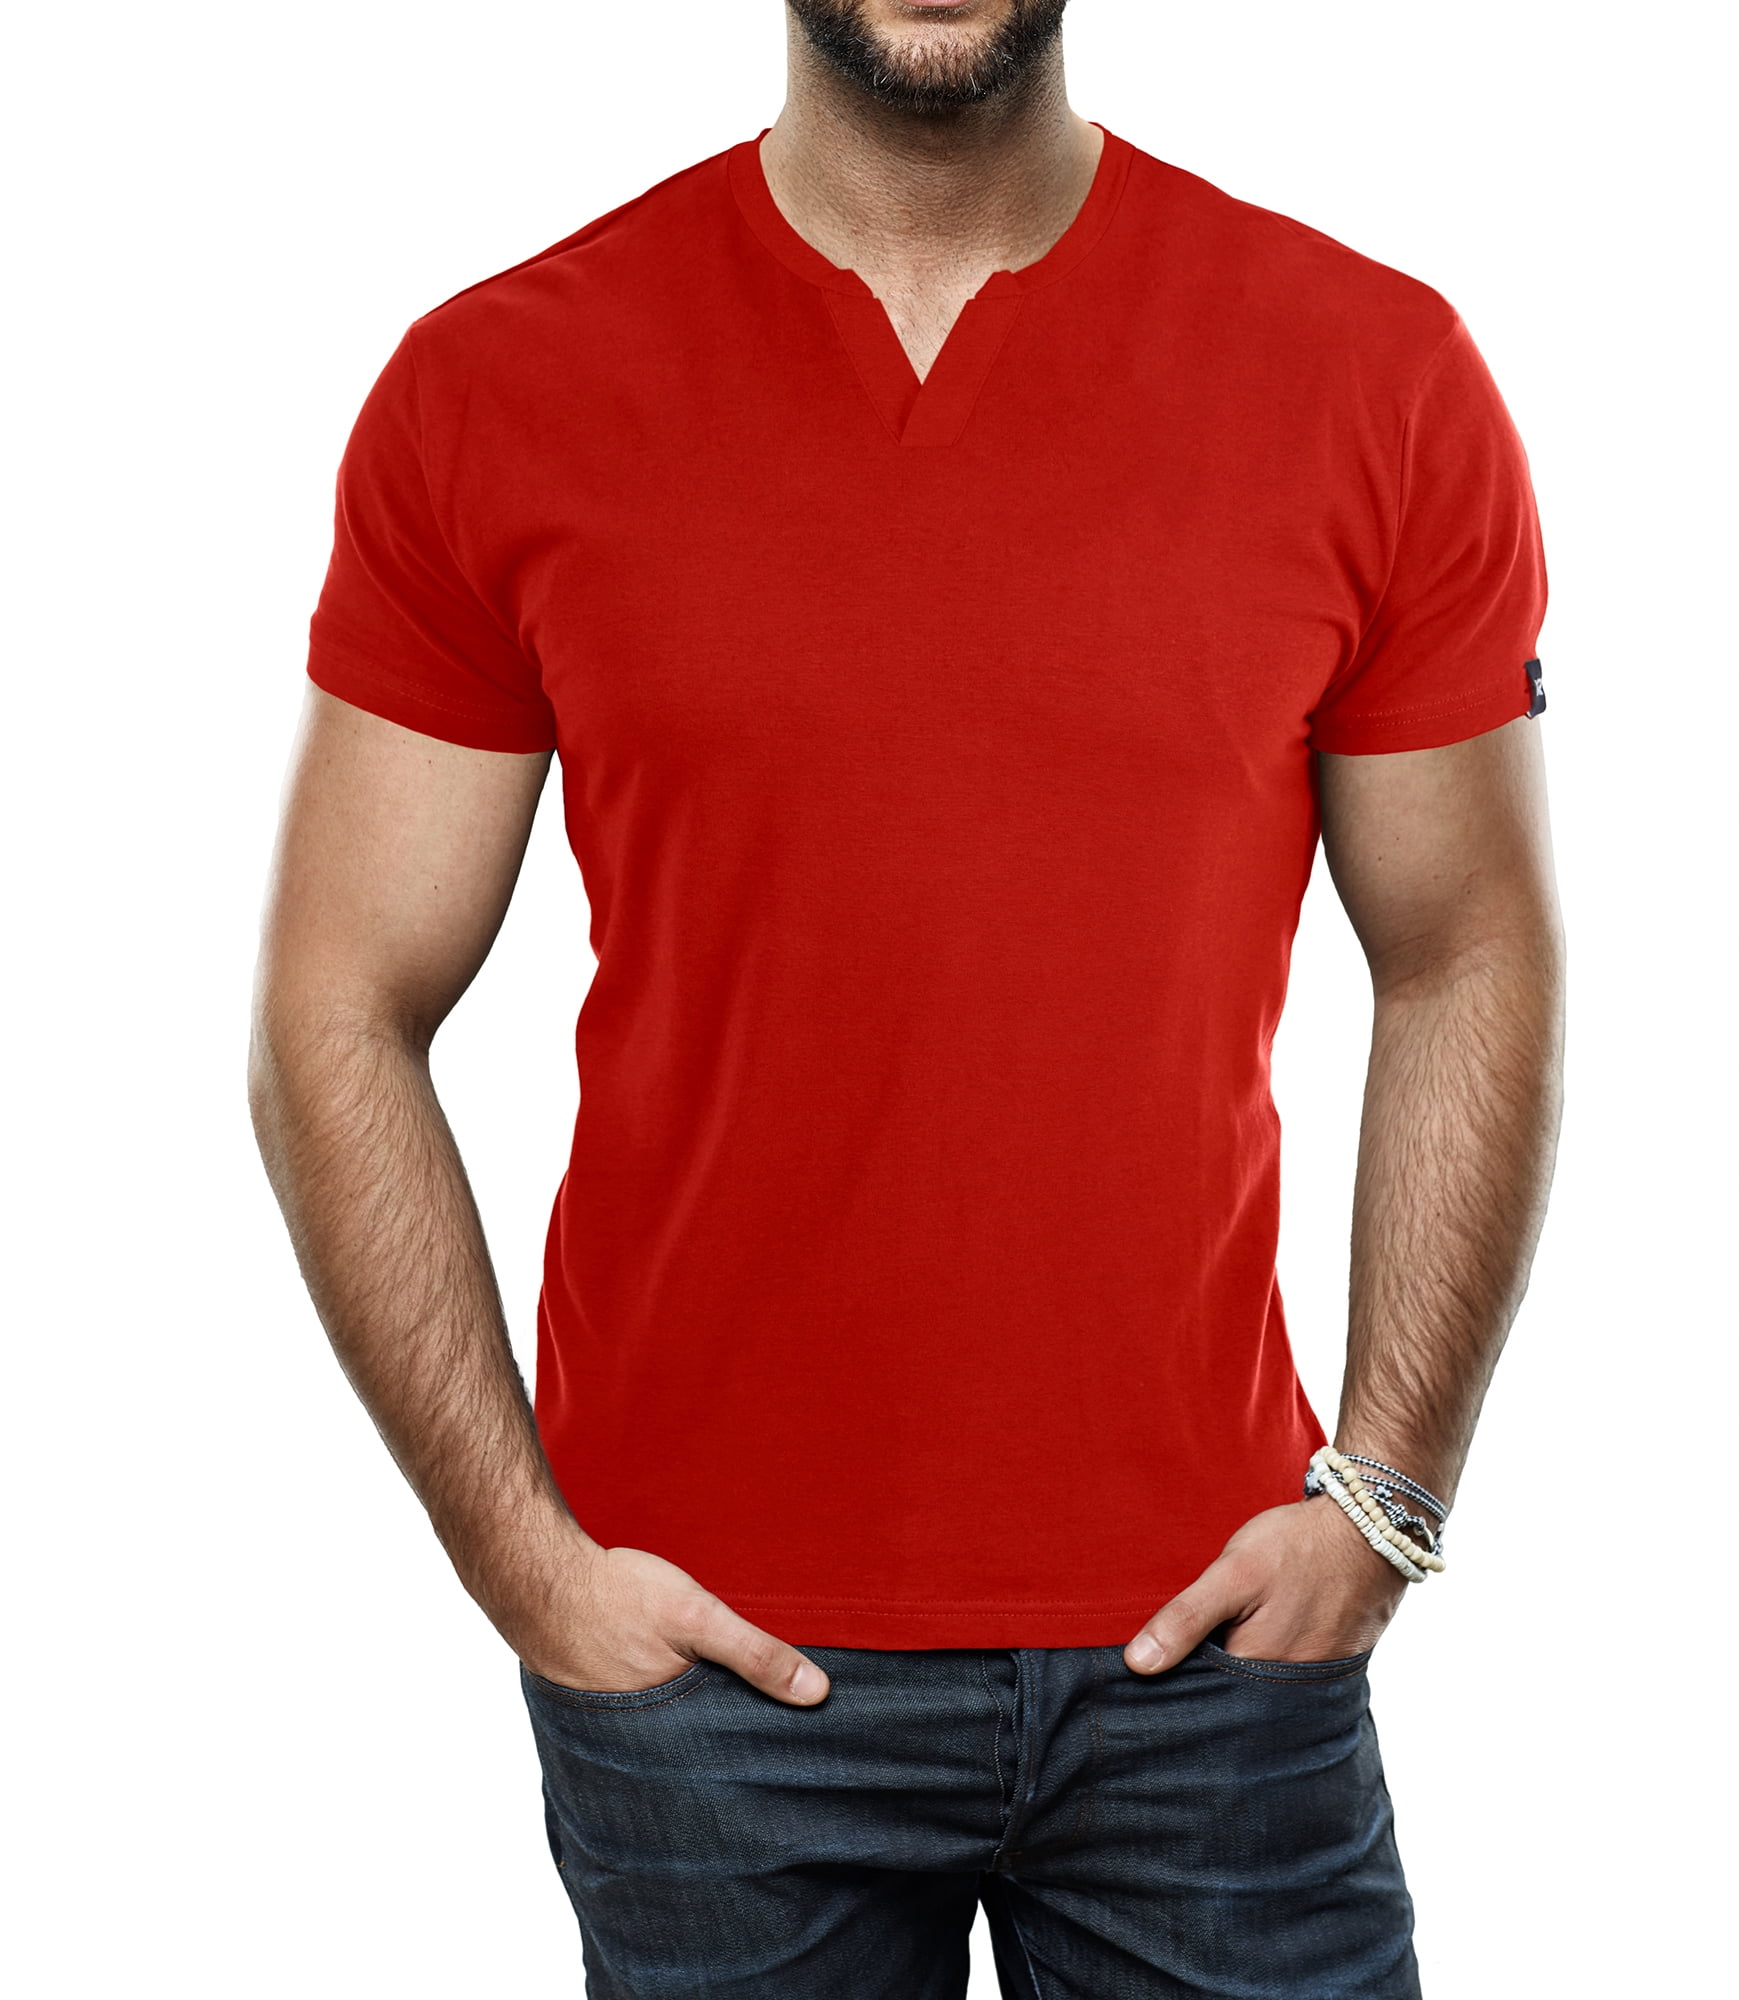 X RAY Men's Soft Stretch Cotton Solid Short Sleeve V-Neck Slim Fit T-Shirt Fashion Casual Tee for Men 